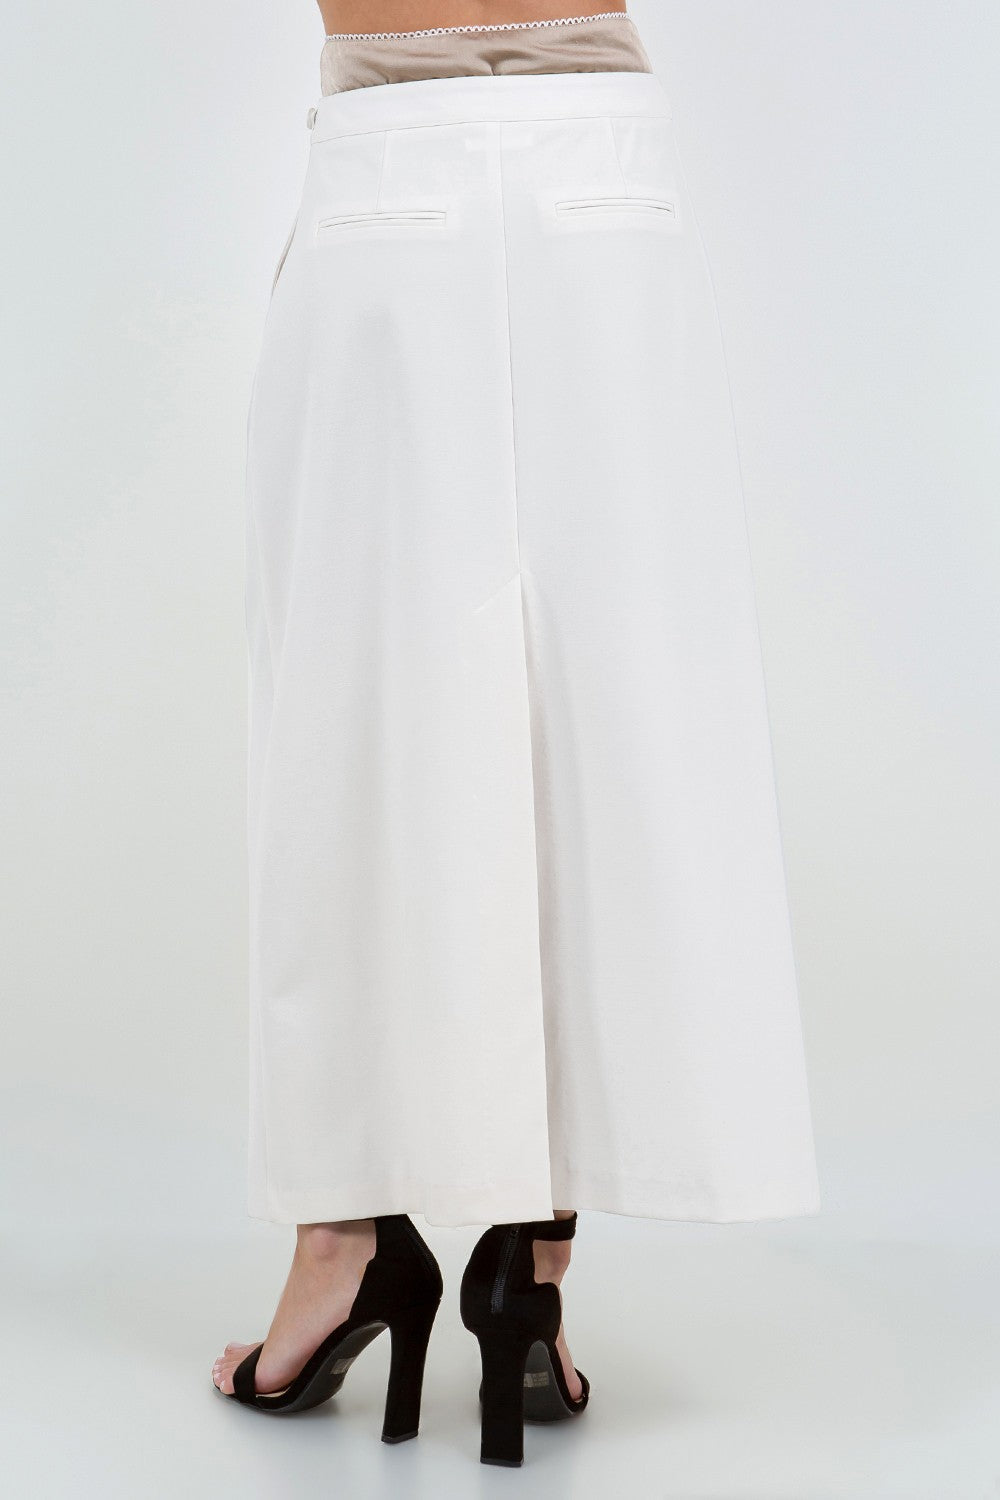 DOUBLE LAYERED MAXI SKIRT